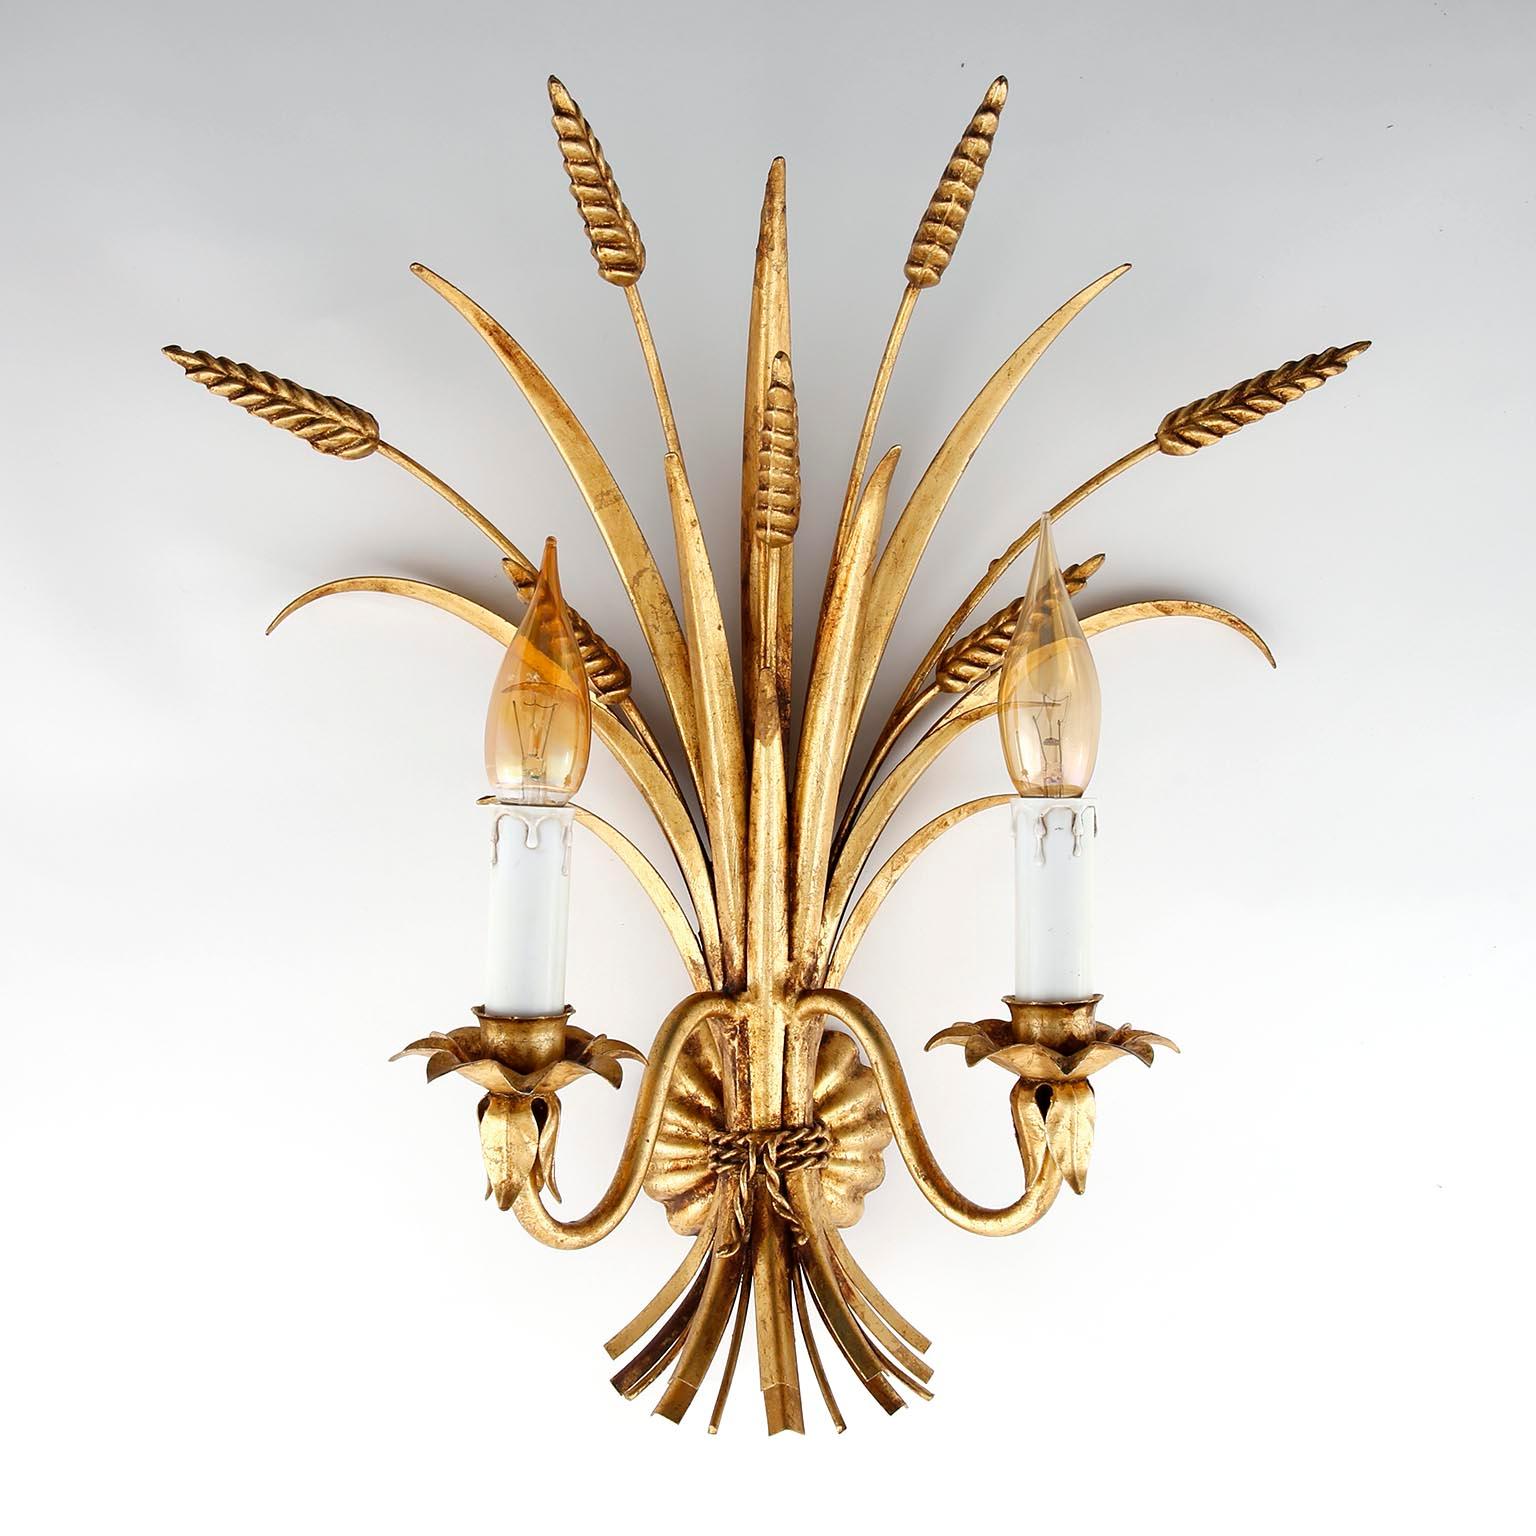 A pair of Hollywood Regency wall light fixtures from Italy manufactured in midcentury, circa 1970 (1960s-1970s). The lights are in the form of a bunch of wheat sheafs and they are made of antique leaf gold plated metal. Each lamp has two sockets for